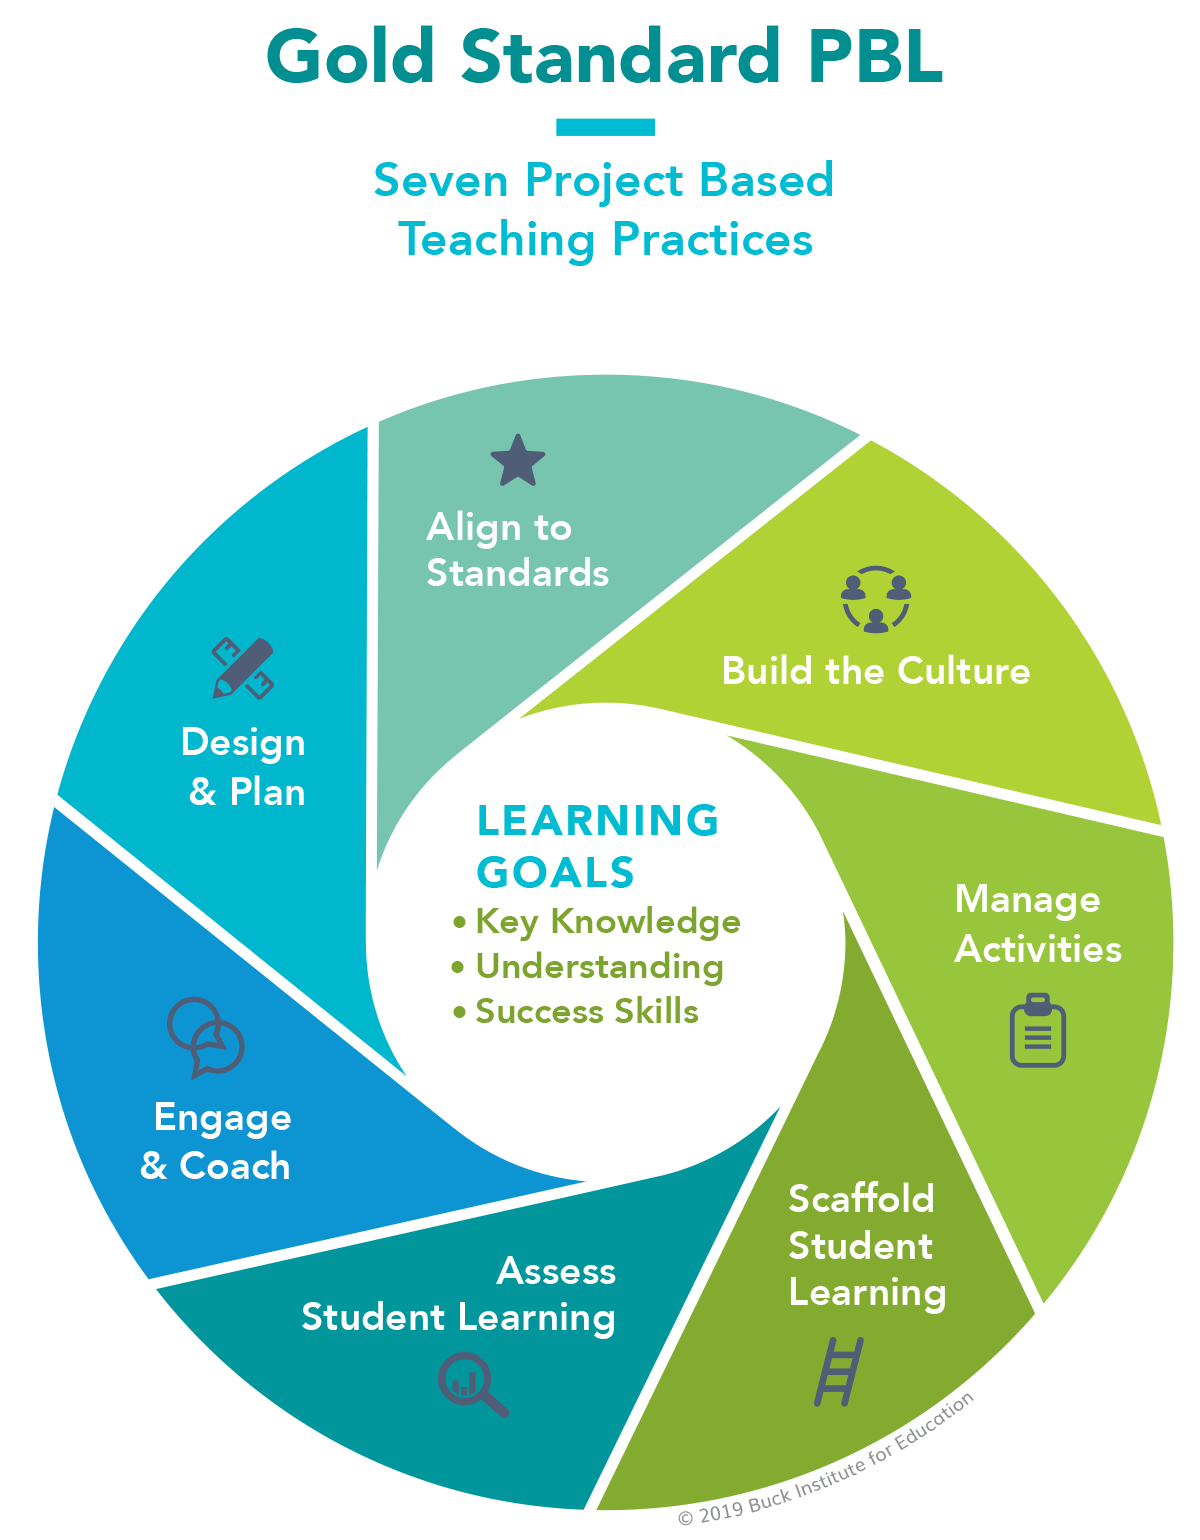 PBLWorks Gold Standard Teaching Practices